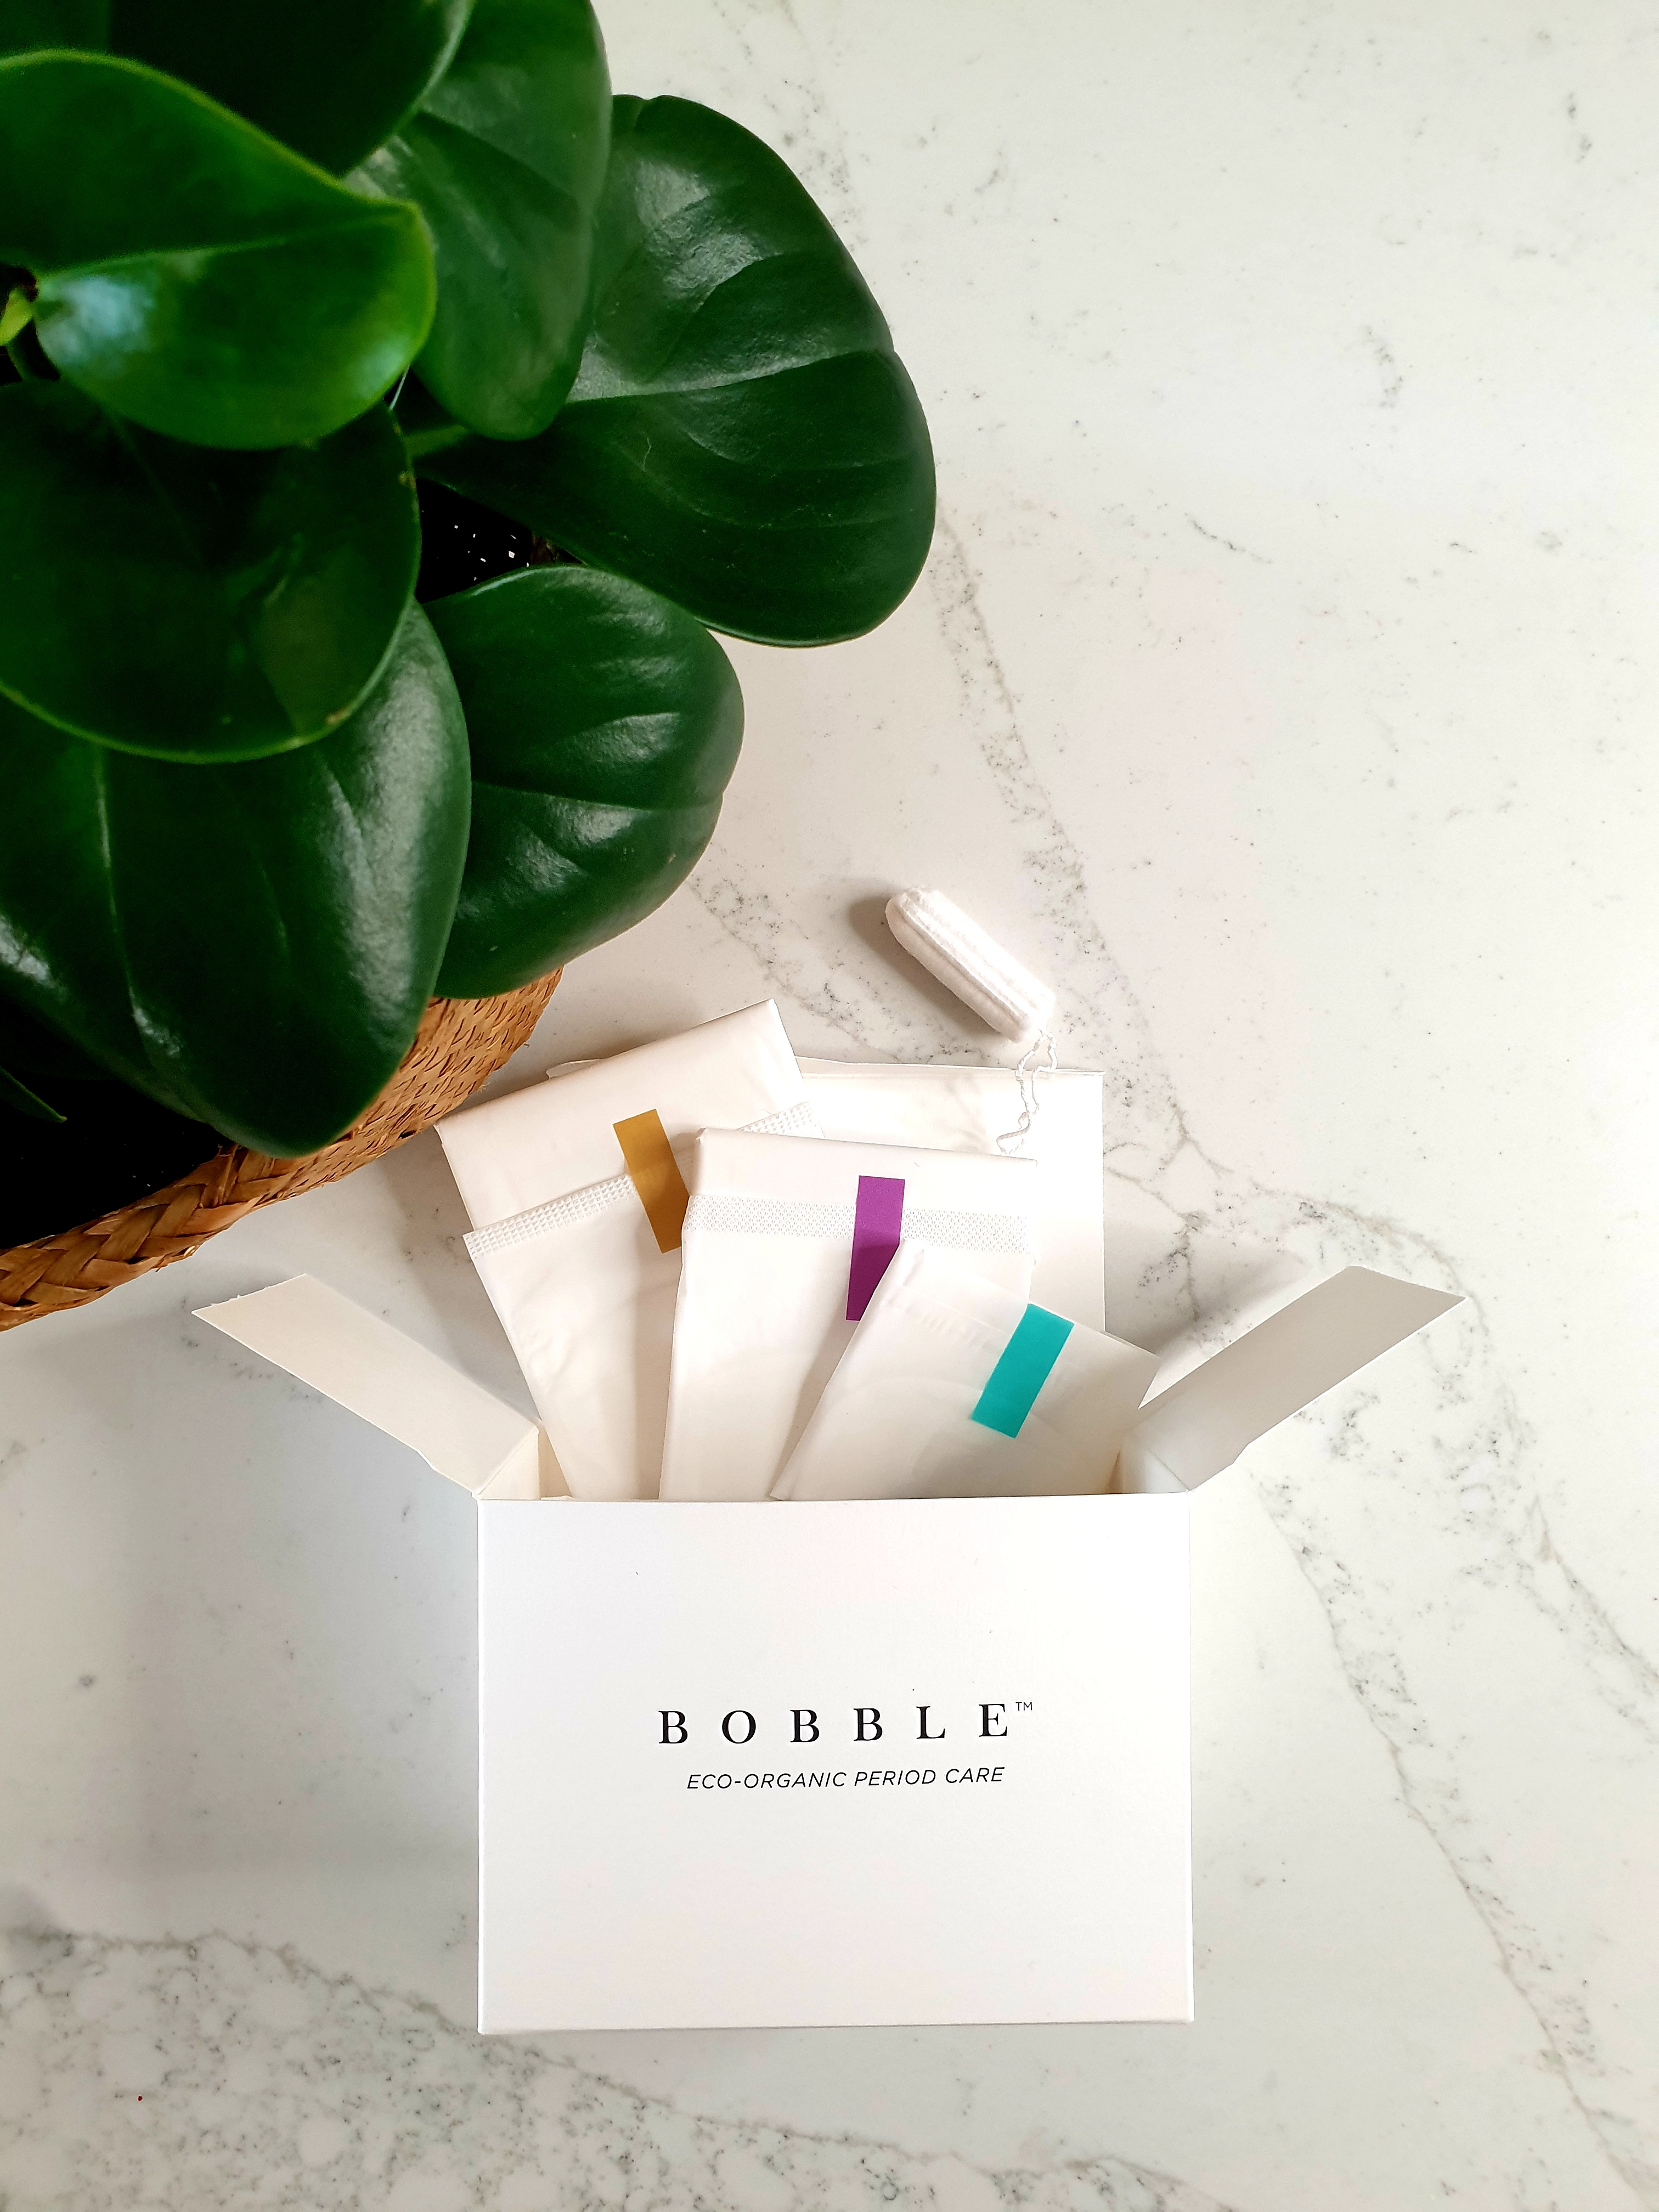 Malisse Tan of Bobble on what *actually* goes into your period products (фото 2)